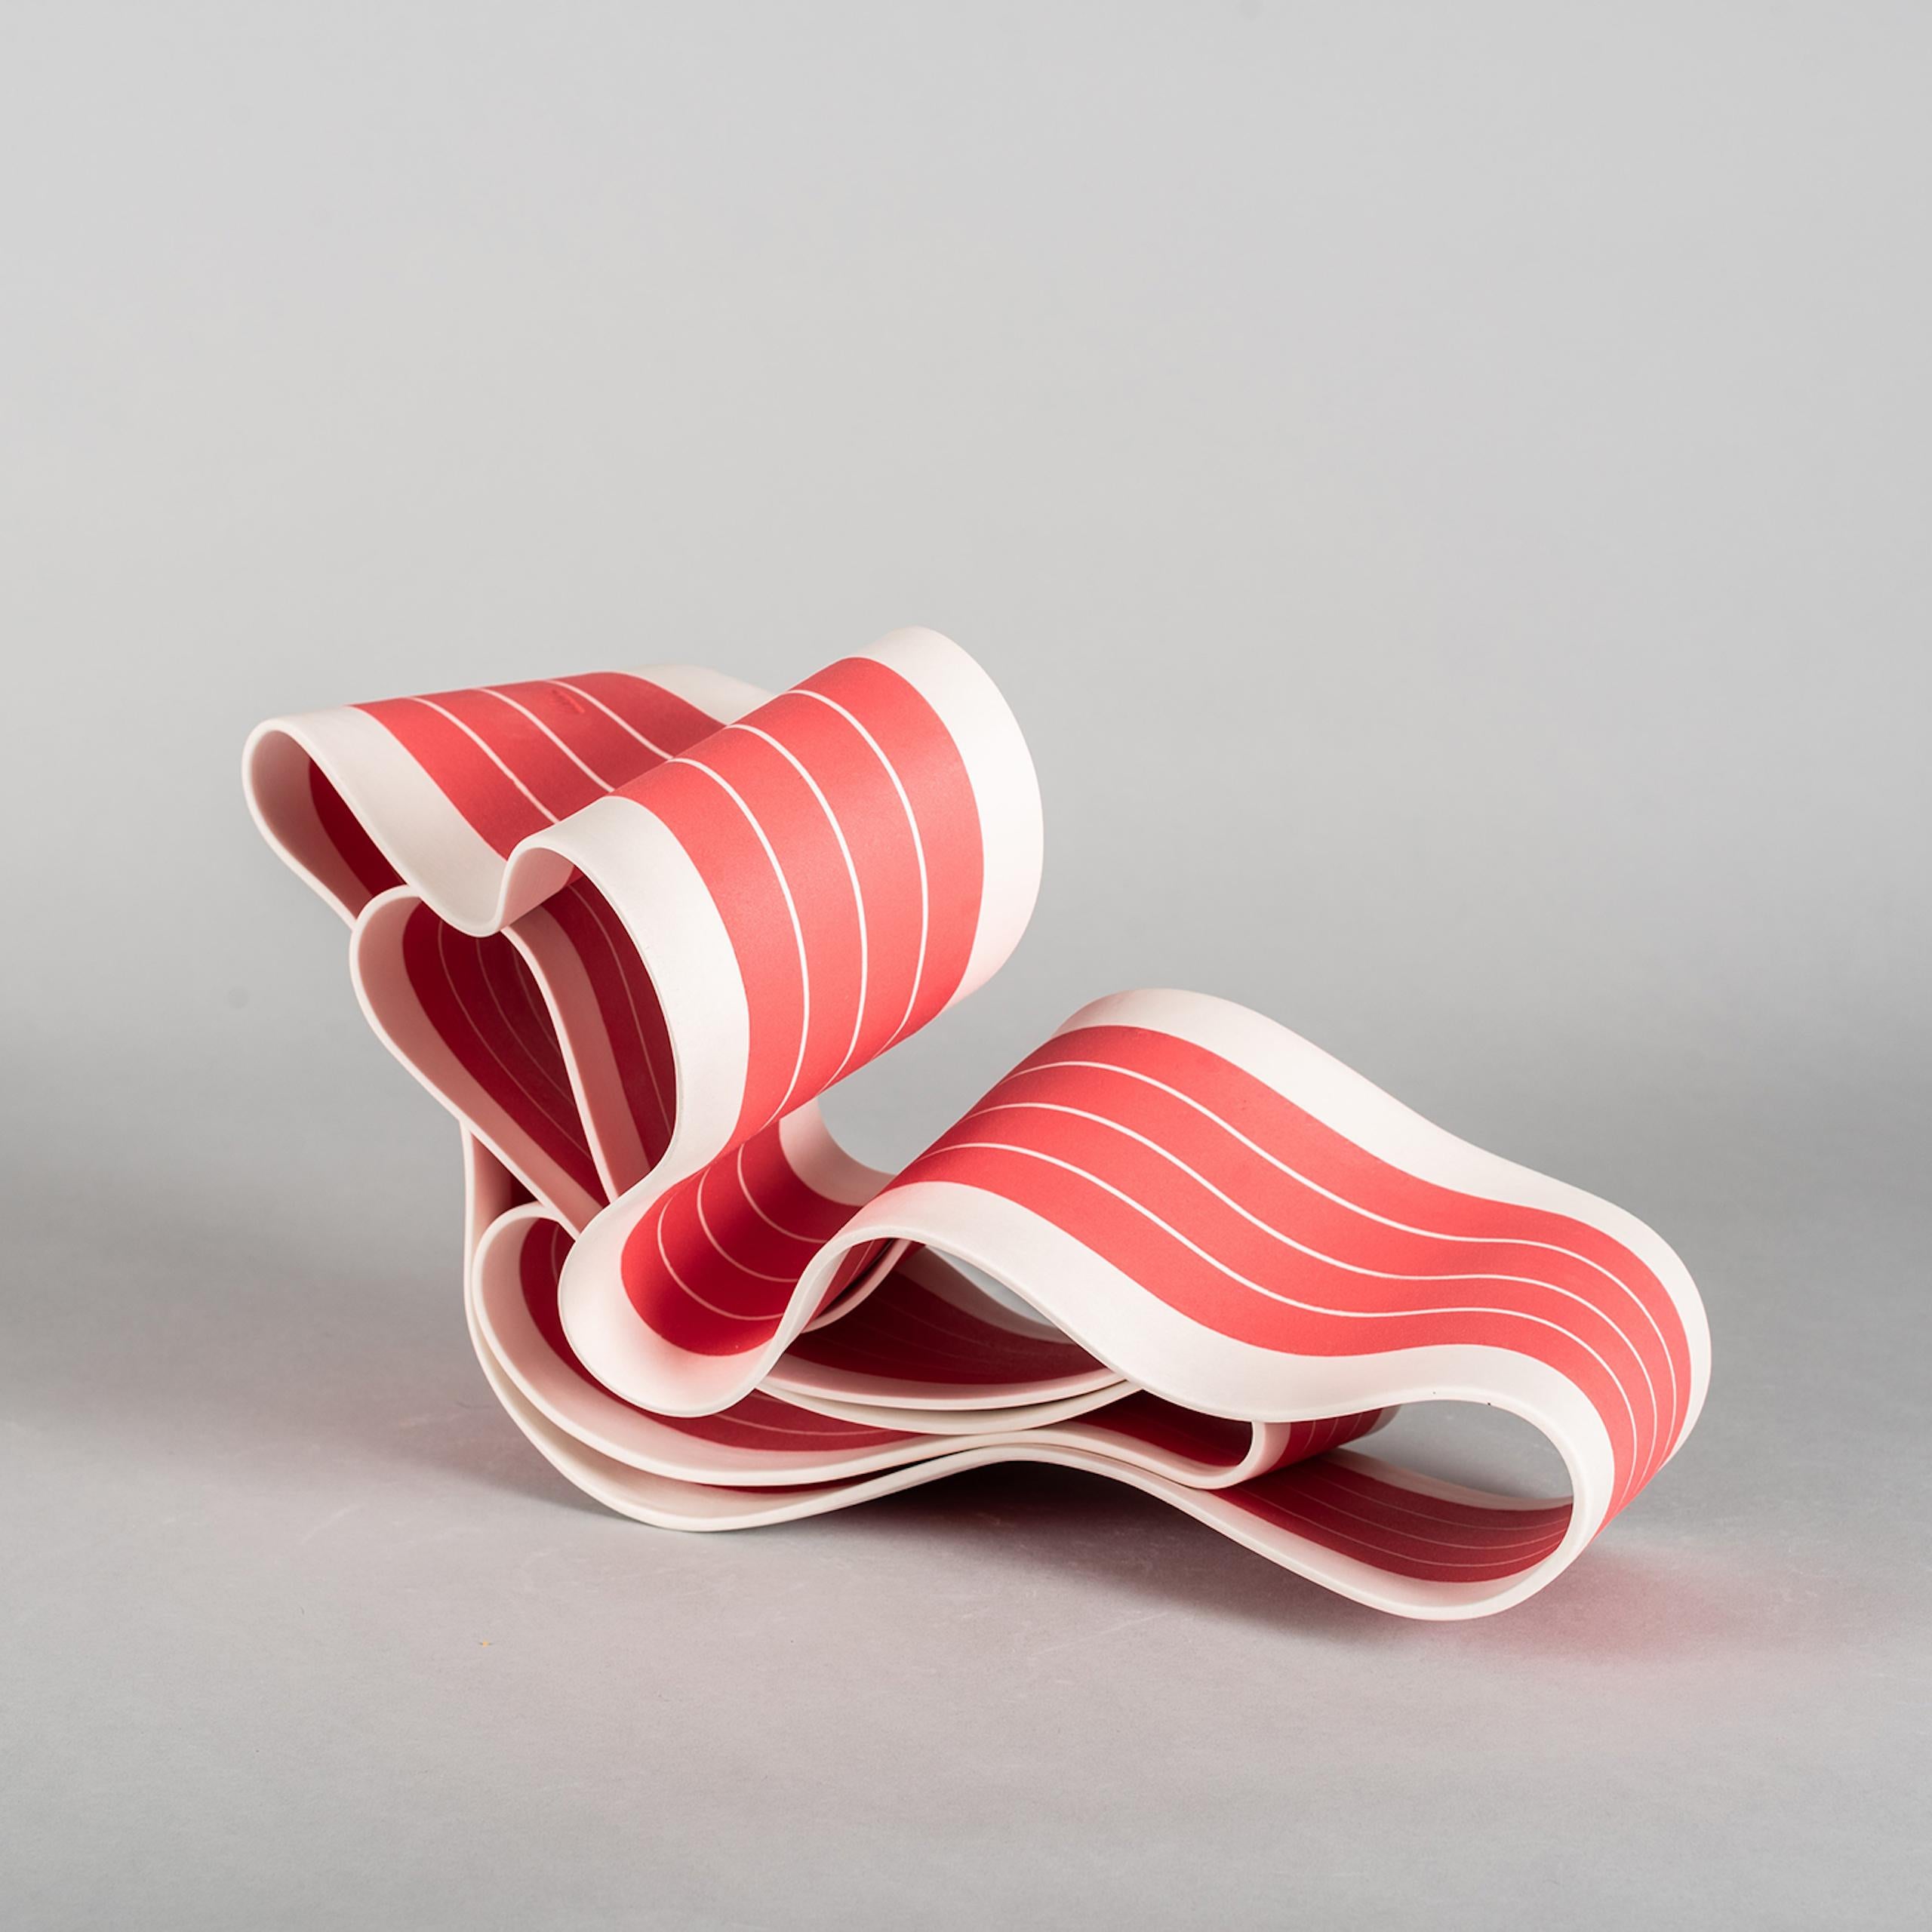 Folding in Motion 3 by Simcha Even-Chen - porcelain sculpture, red For Sale 4